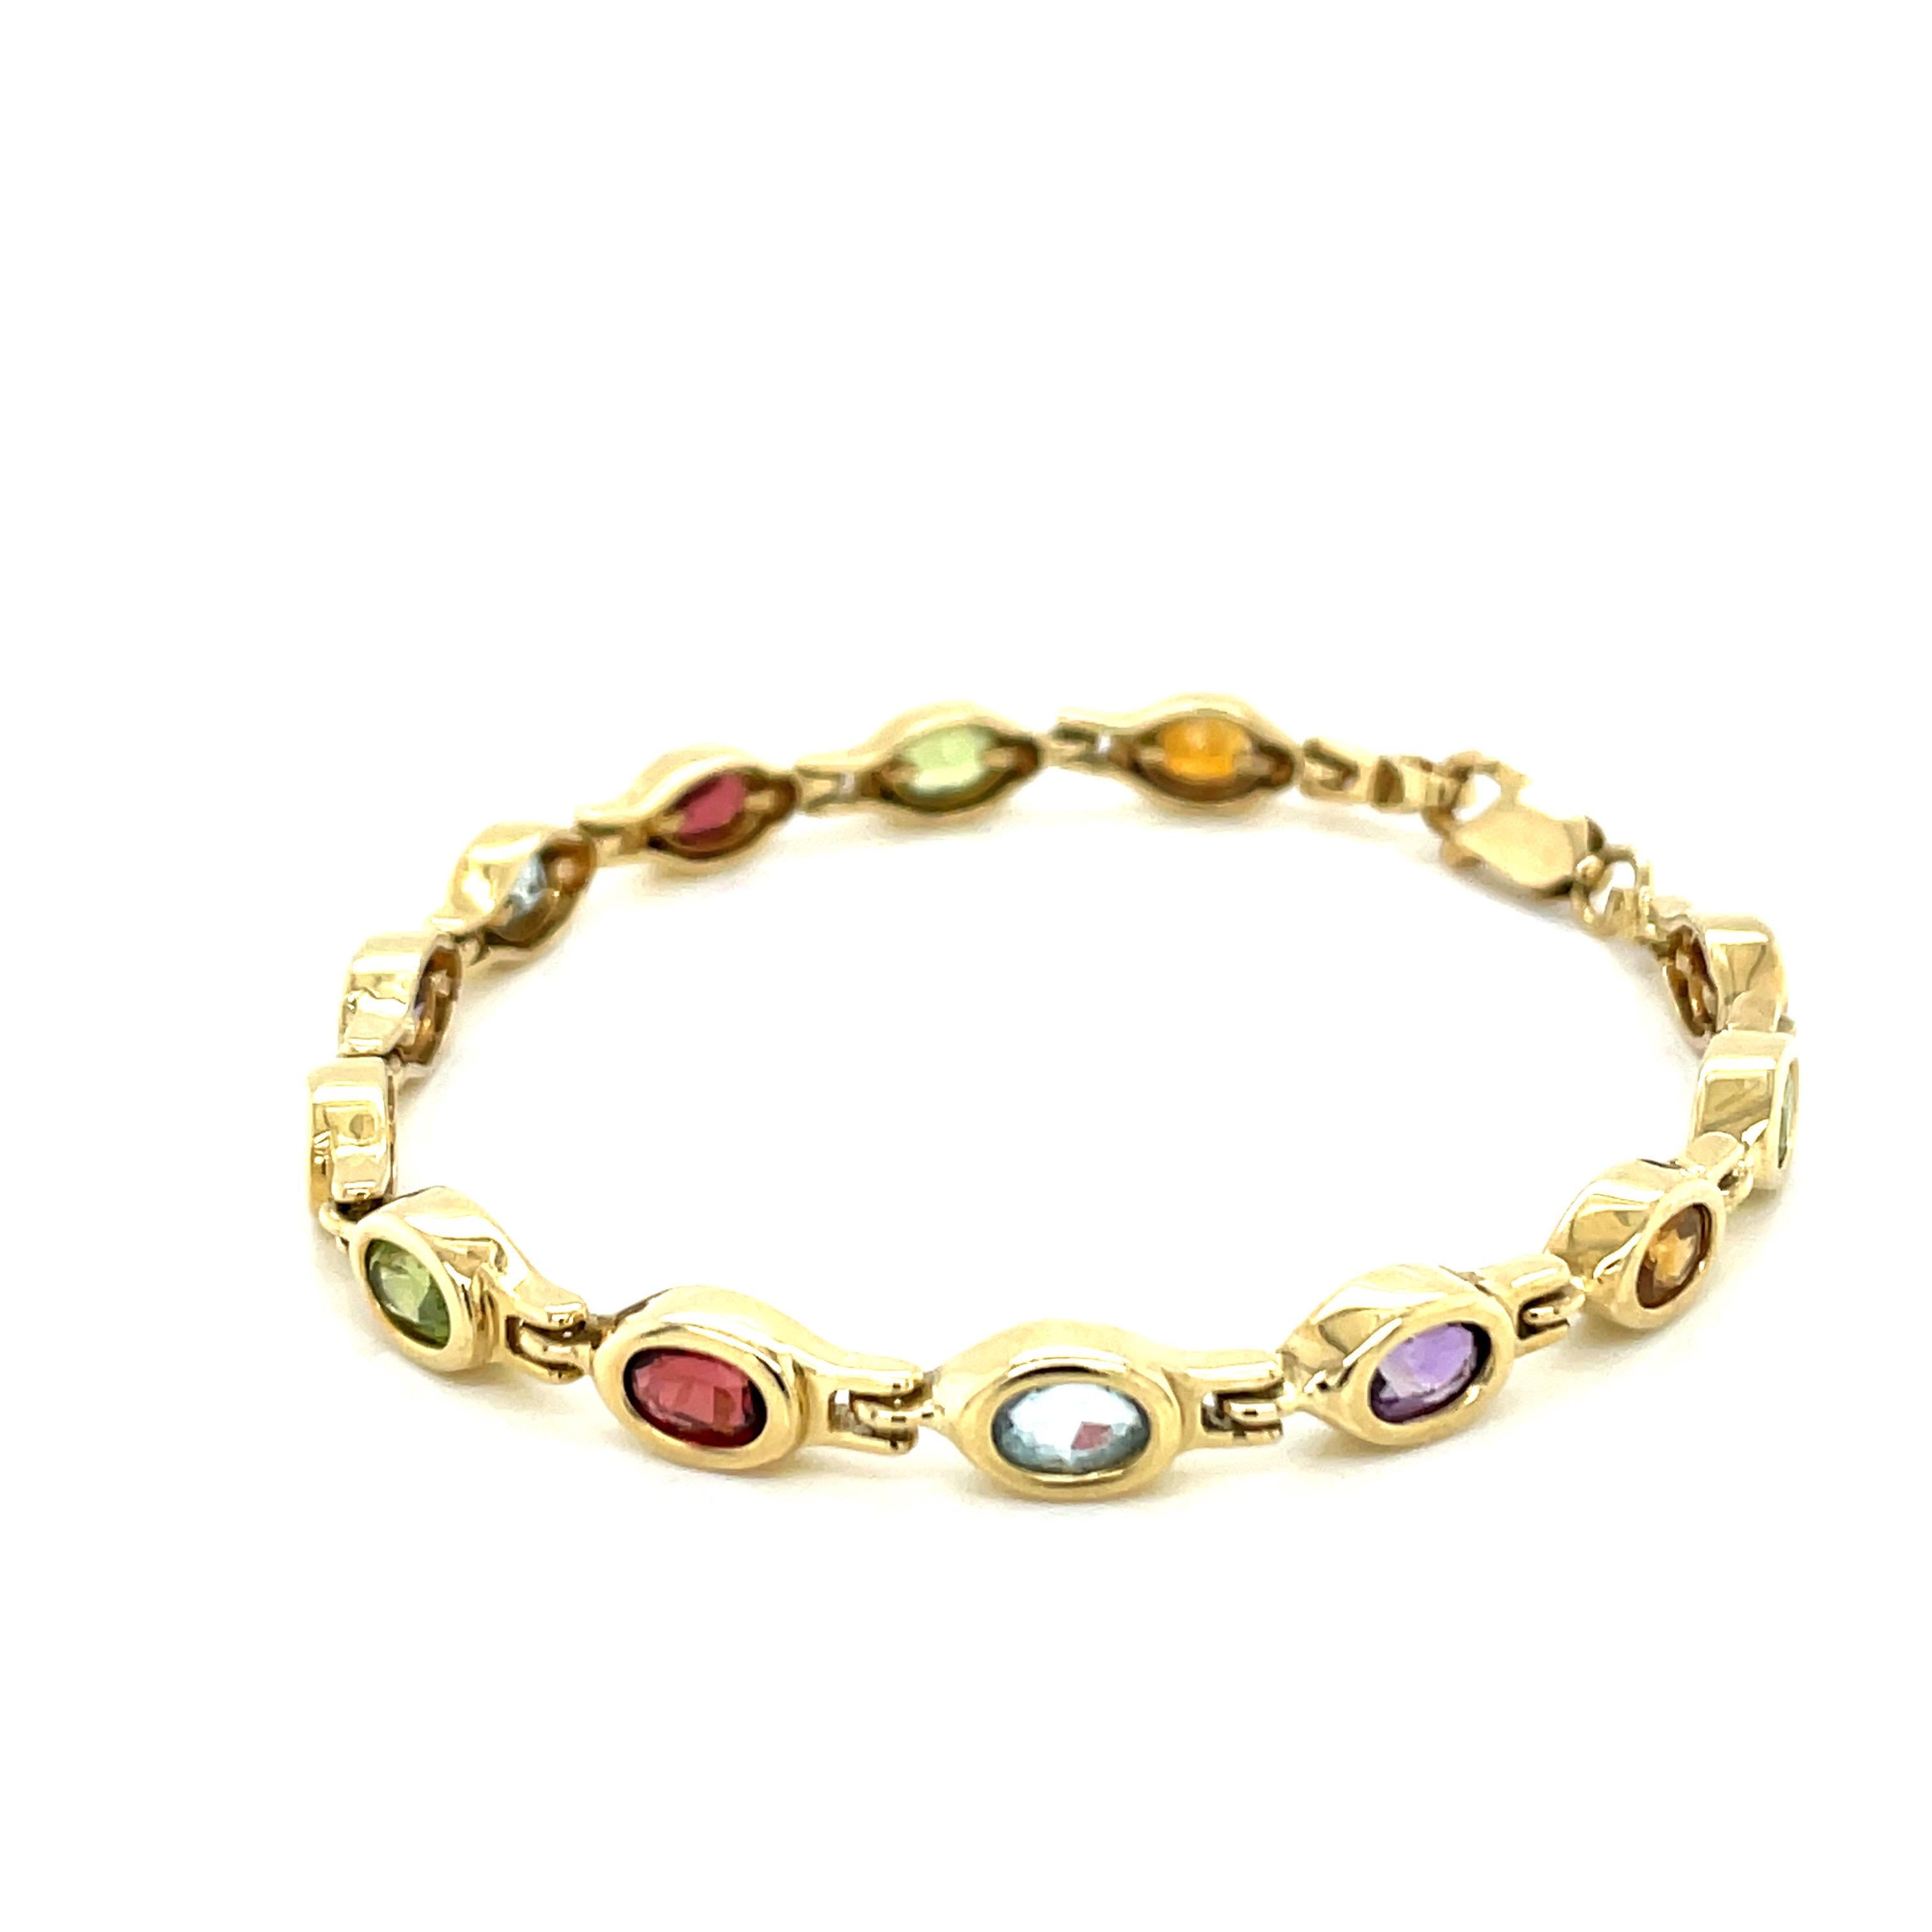 Vintage 14K Yellow Gold Multi Color Gemstone Bezel Bracelet  - There are 13 oval multi color gemstones measuring 6 x 4mm set in gold bezels. The order of the gemstones from the lobster clasp is: Garnet, Peridot, Citrine, Amethyst, Blue Topaz. The